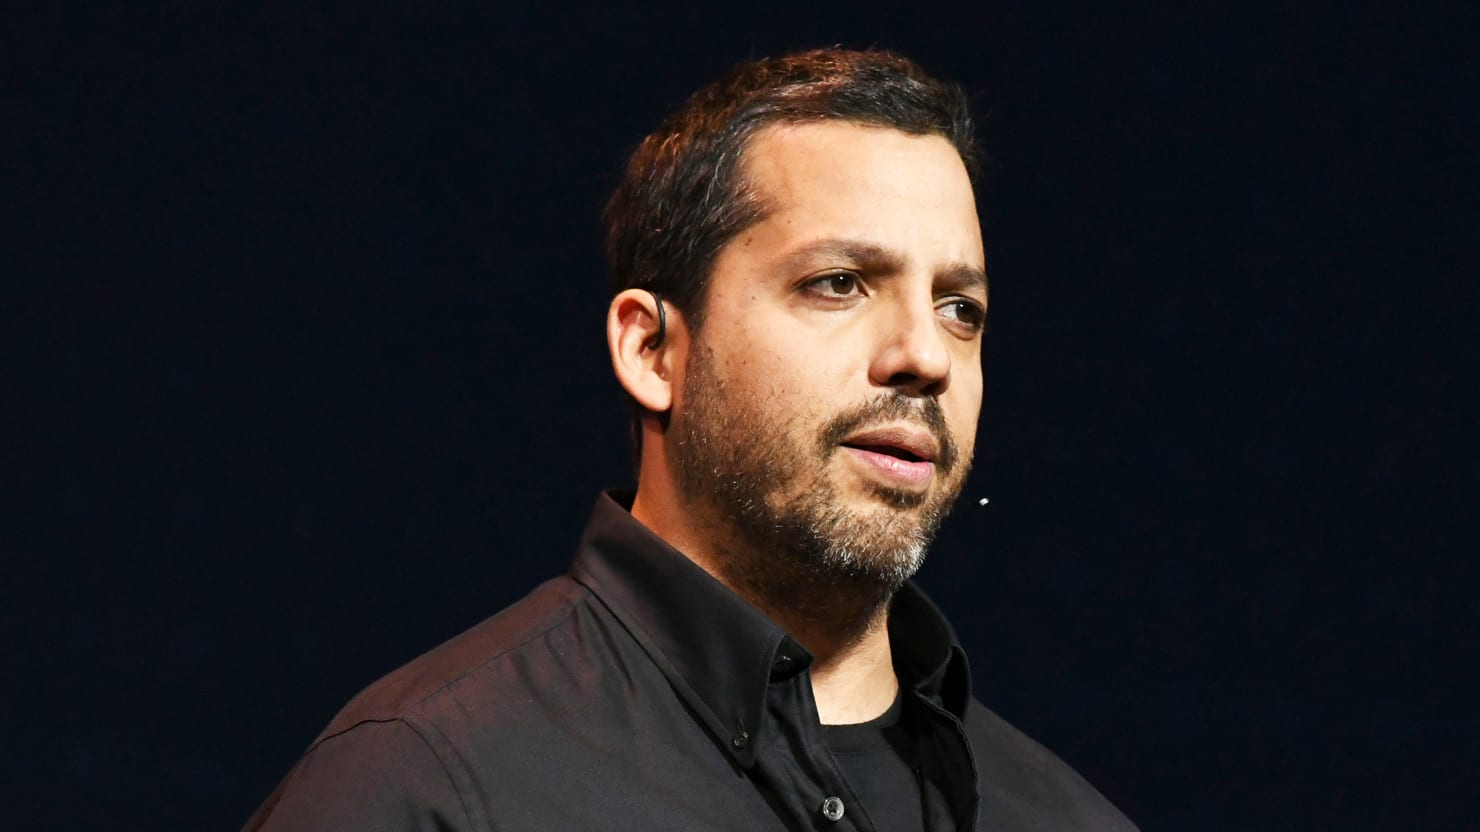 David Blaine Under Nypd Investigation Over Sexual Assault Allegations